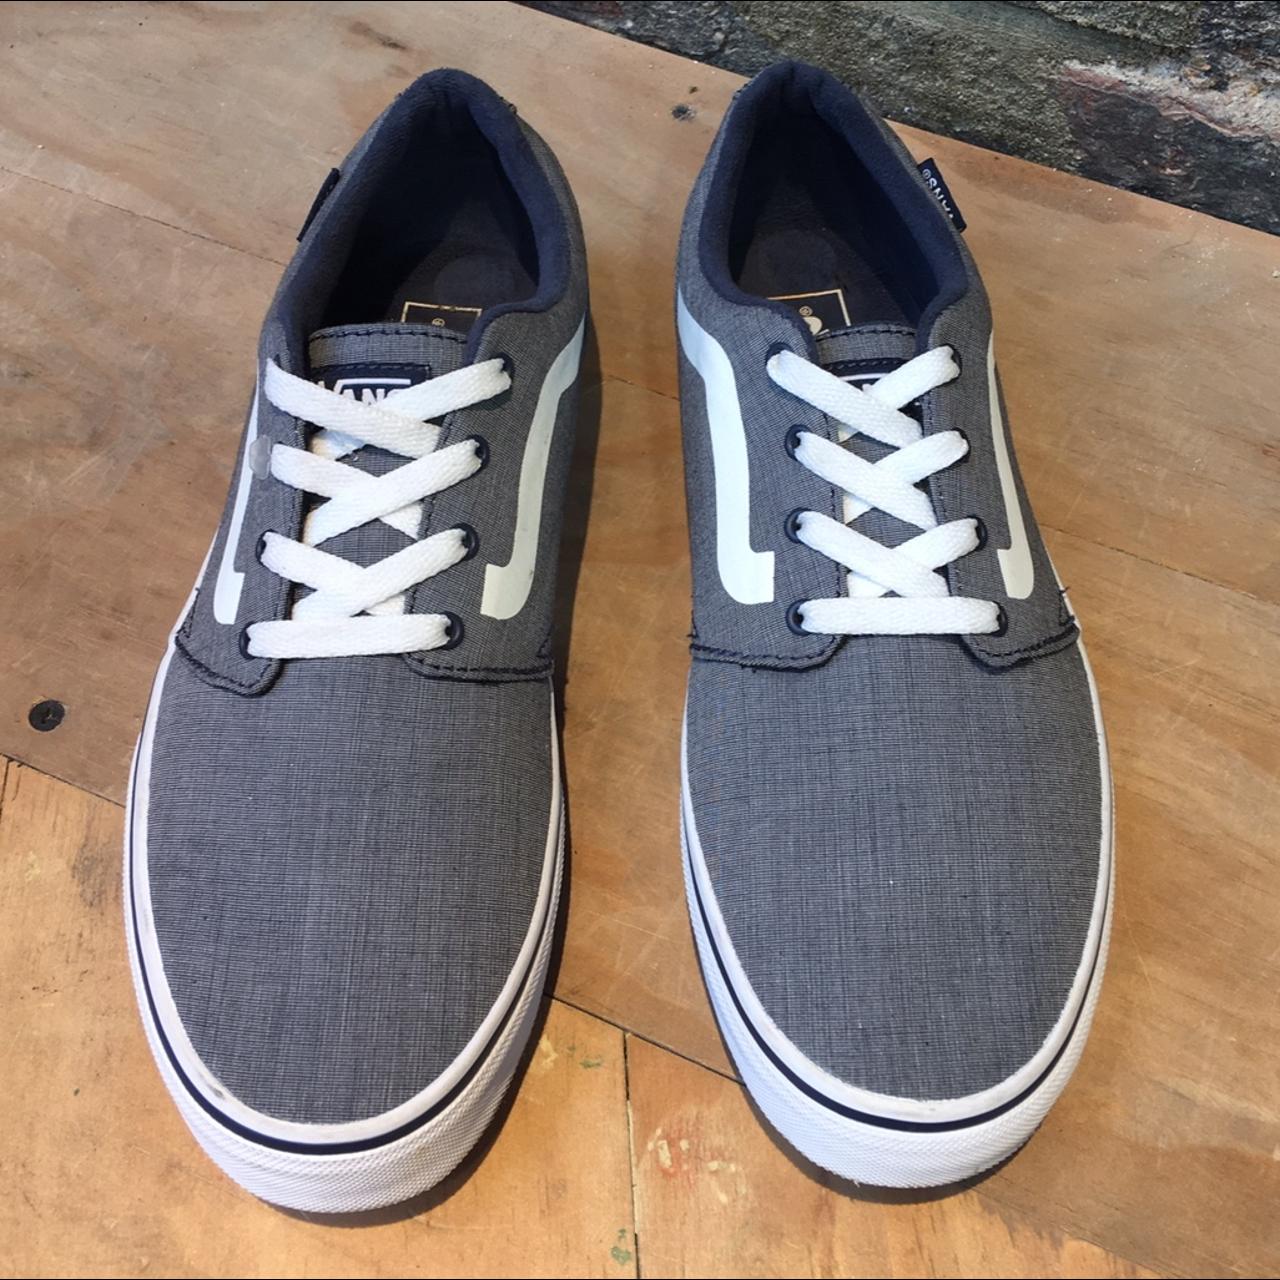 Vans trainers in smart blue. Lace-up fastening and... - Depop